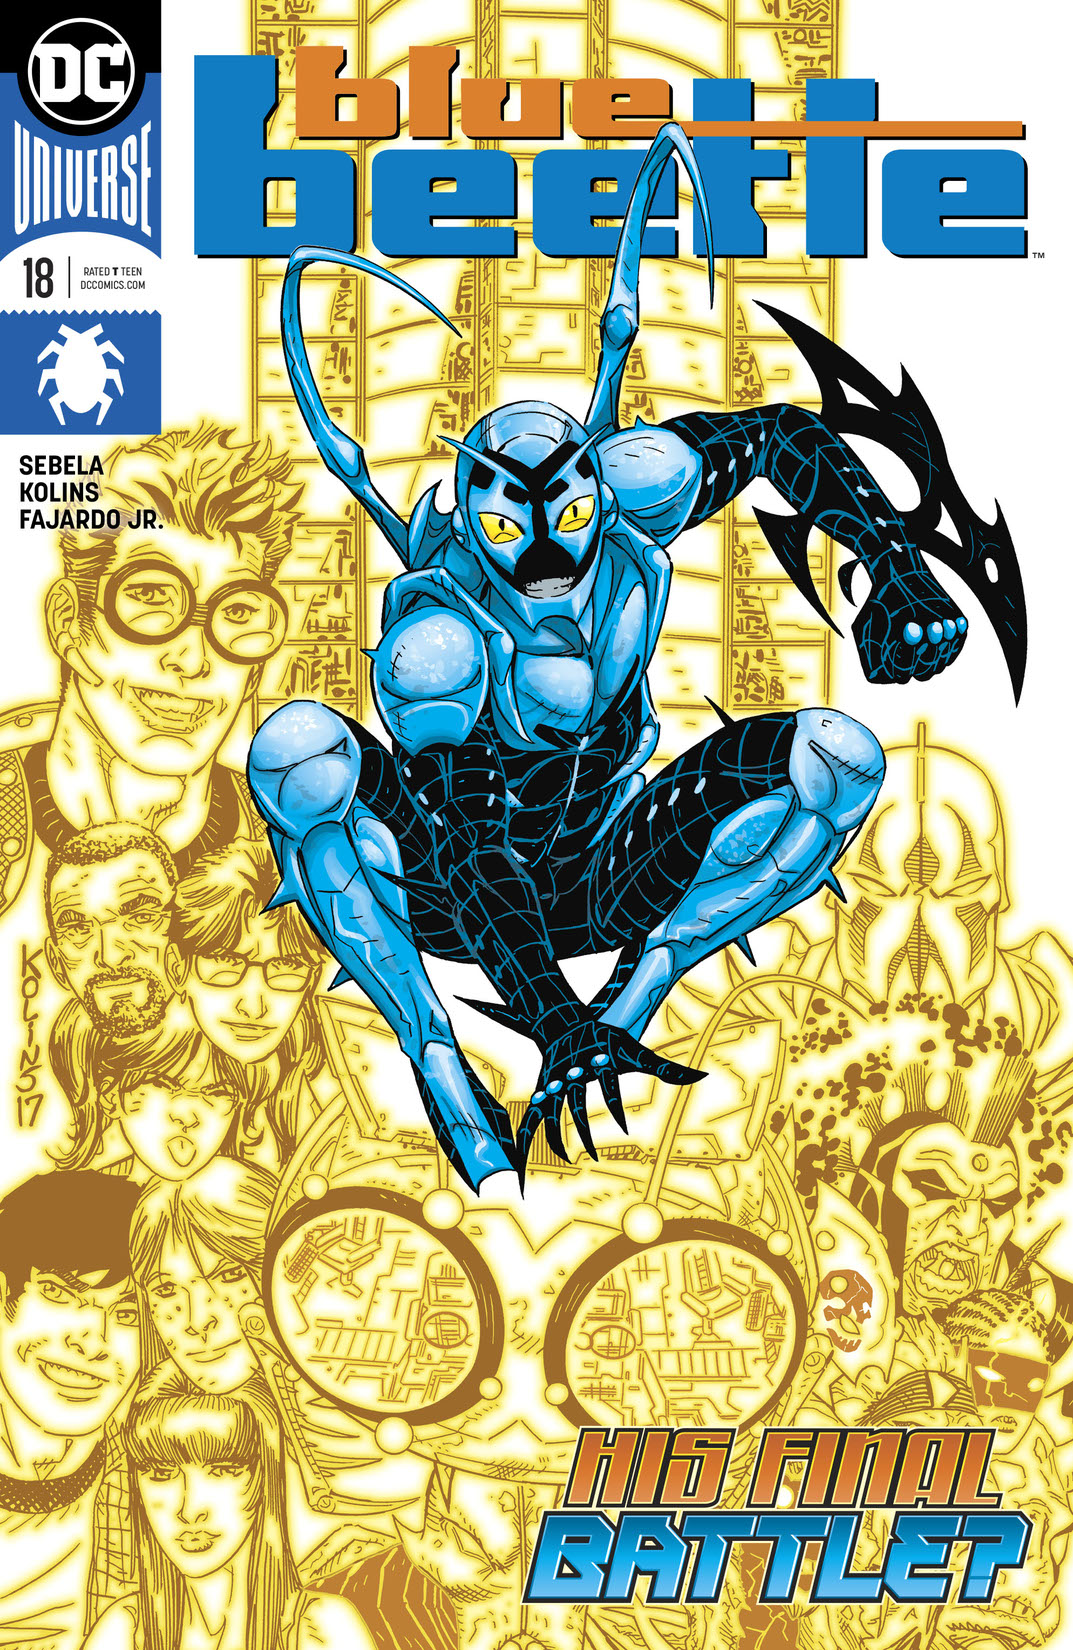 Blue Beetle (2016-) #18 preview images